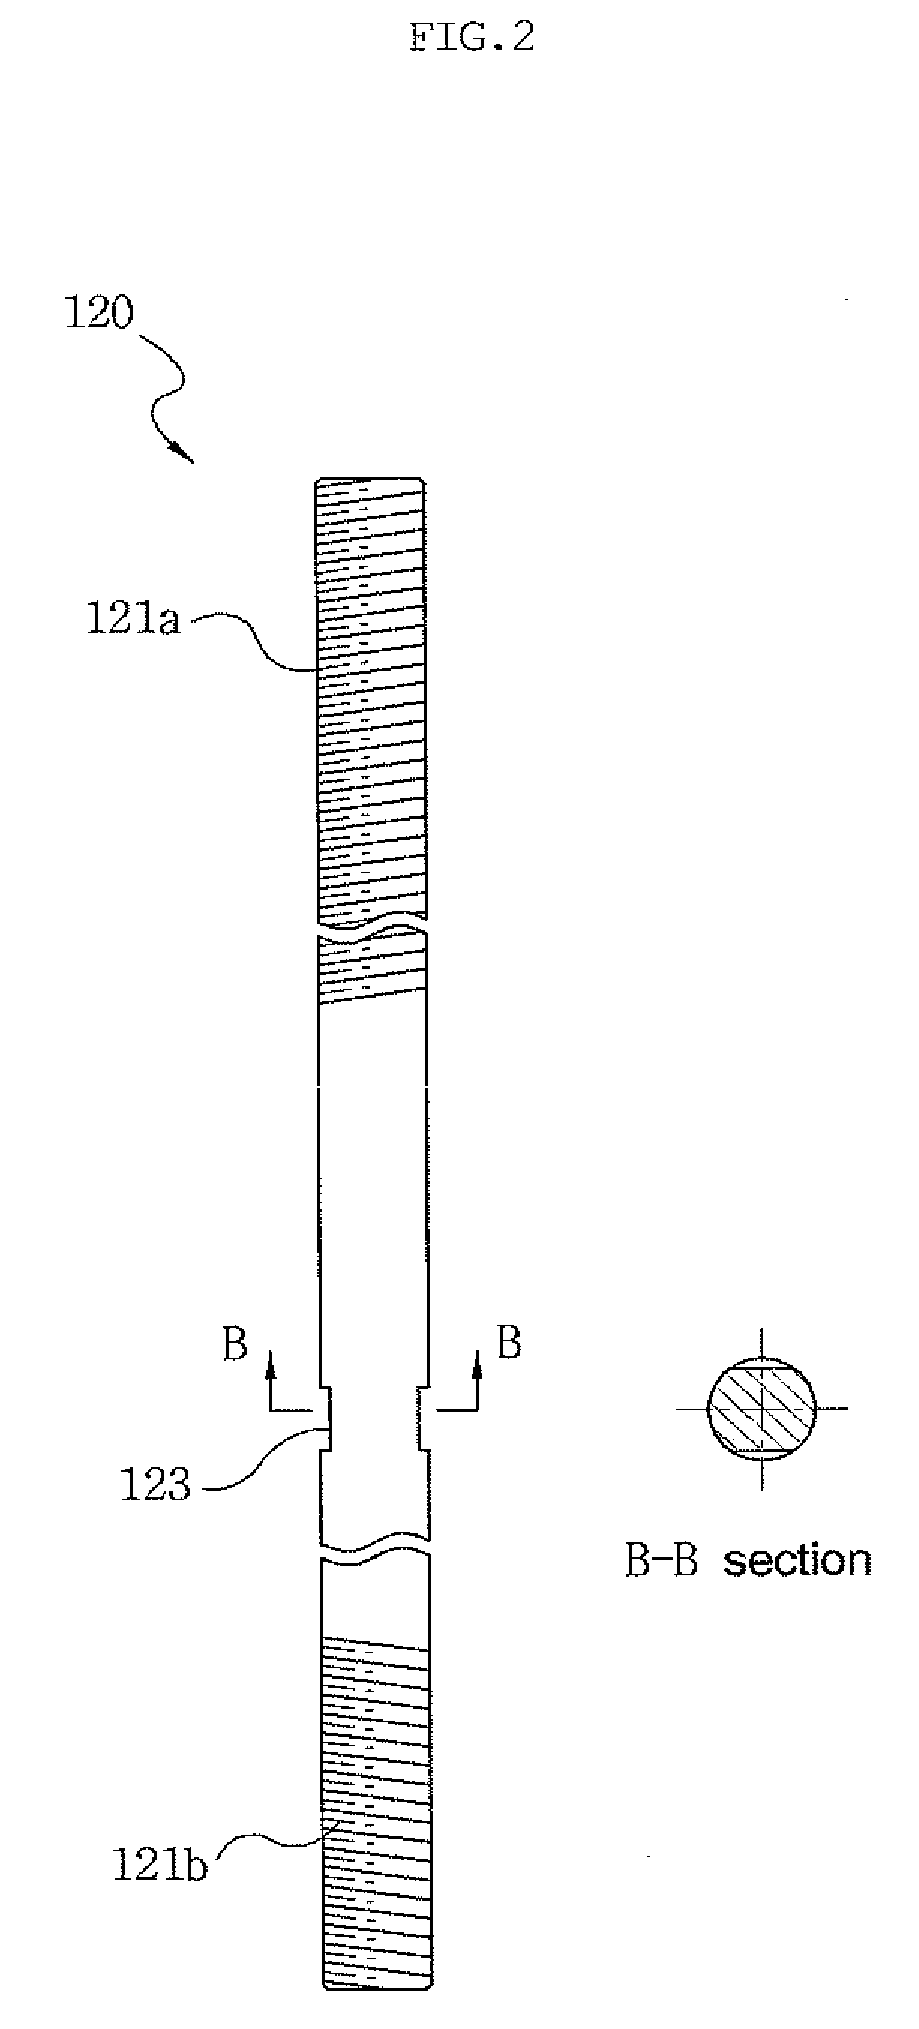 Stack fastening device